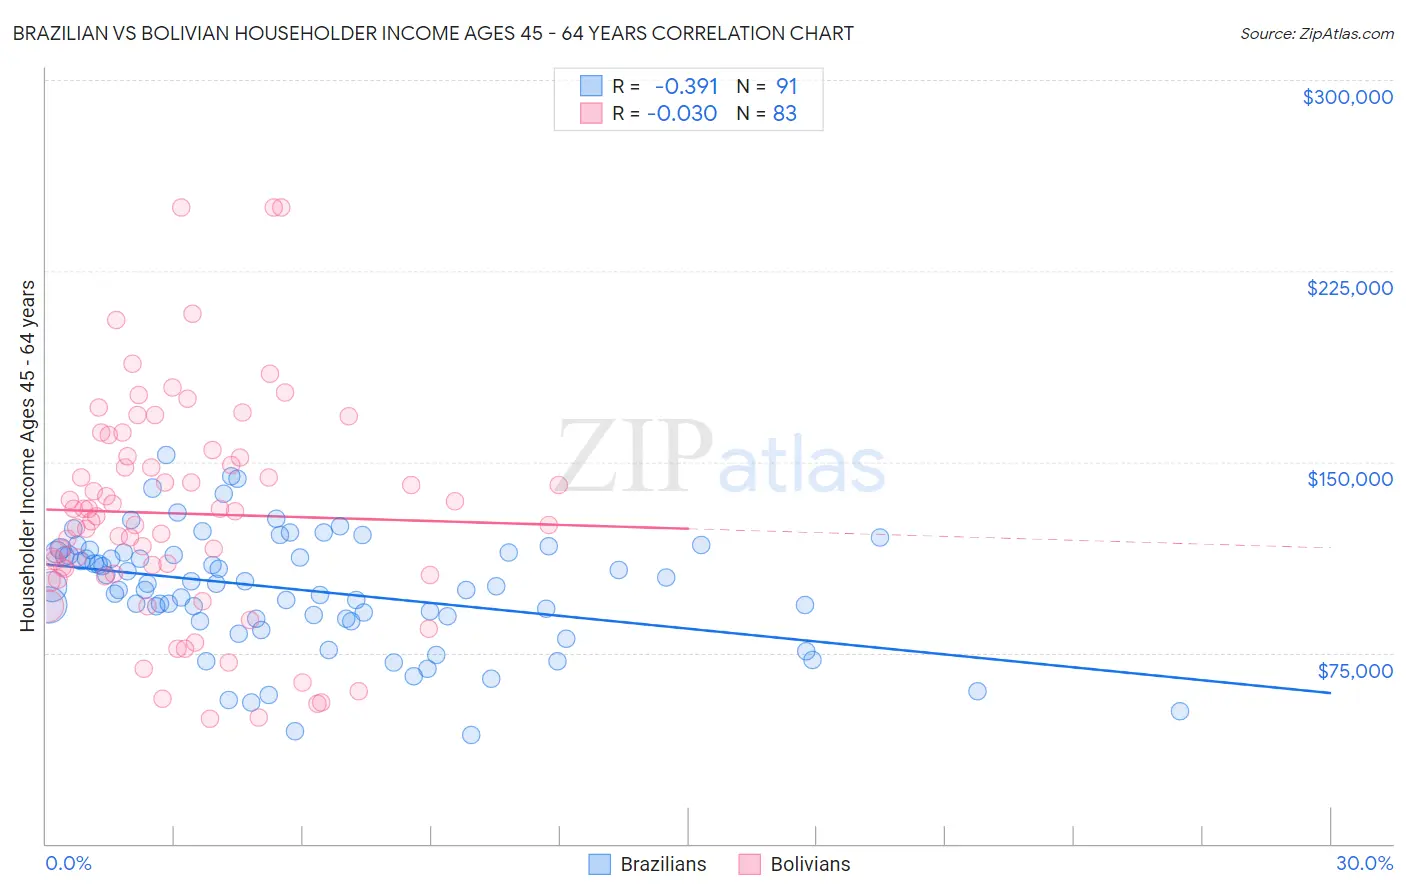 Brazilian vs Bolivian Householder Income Ages 45 - 64 years